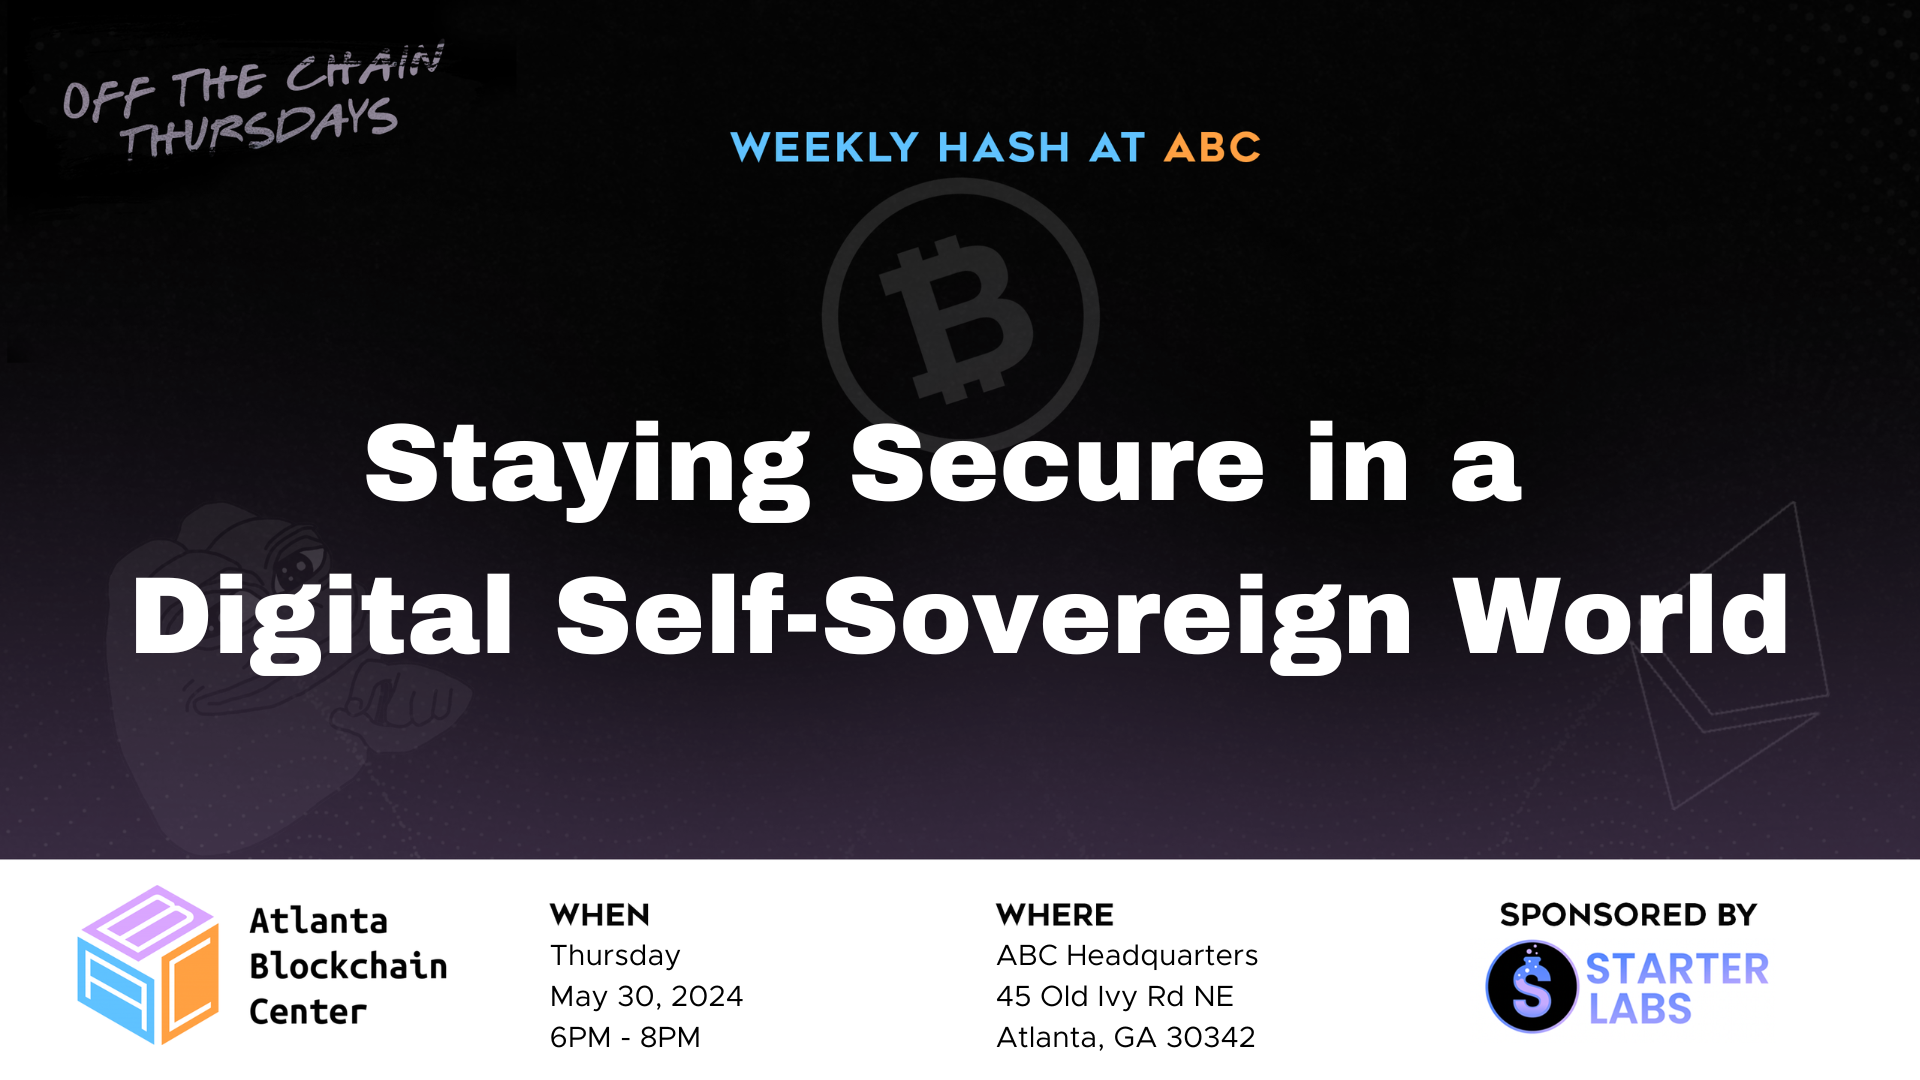 Staying Secure in a Digital Self-Sovereign World